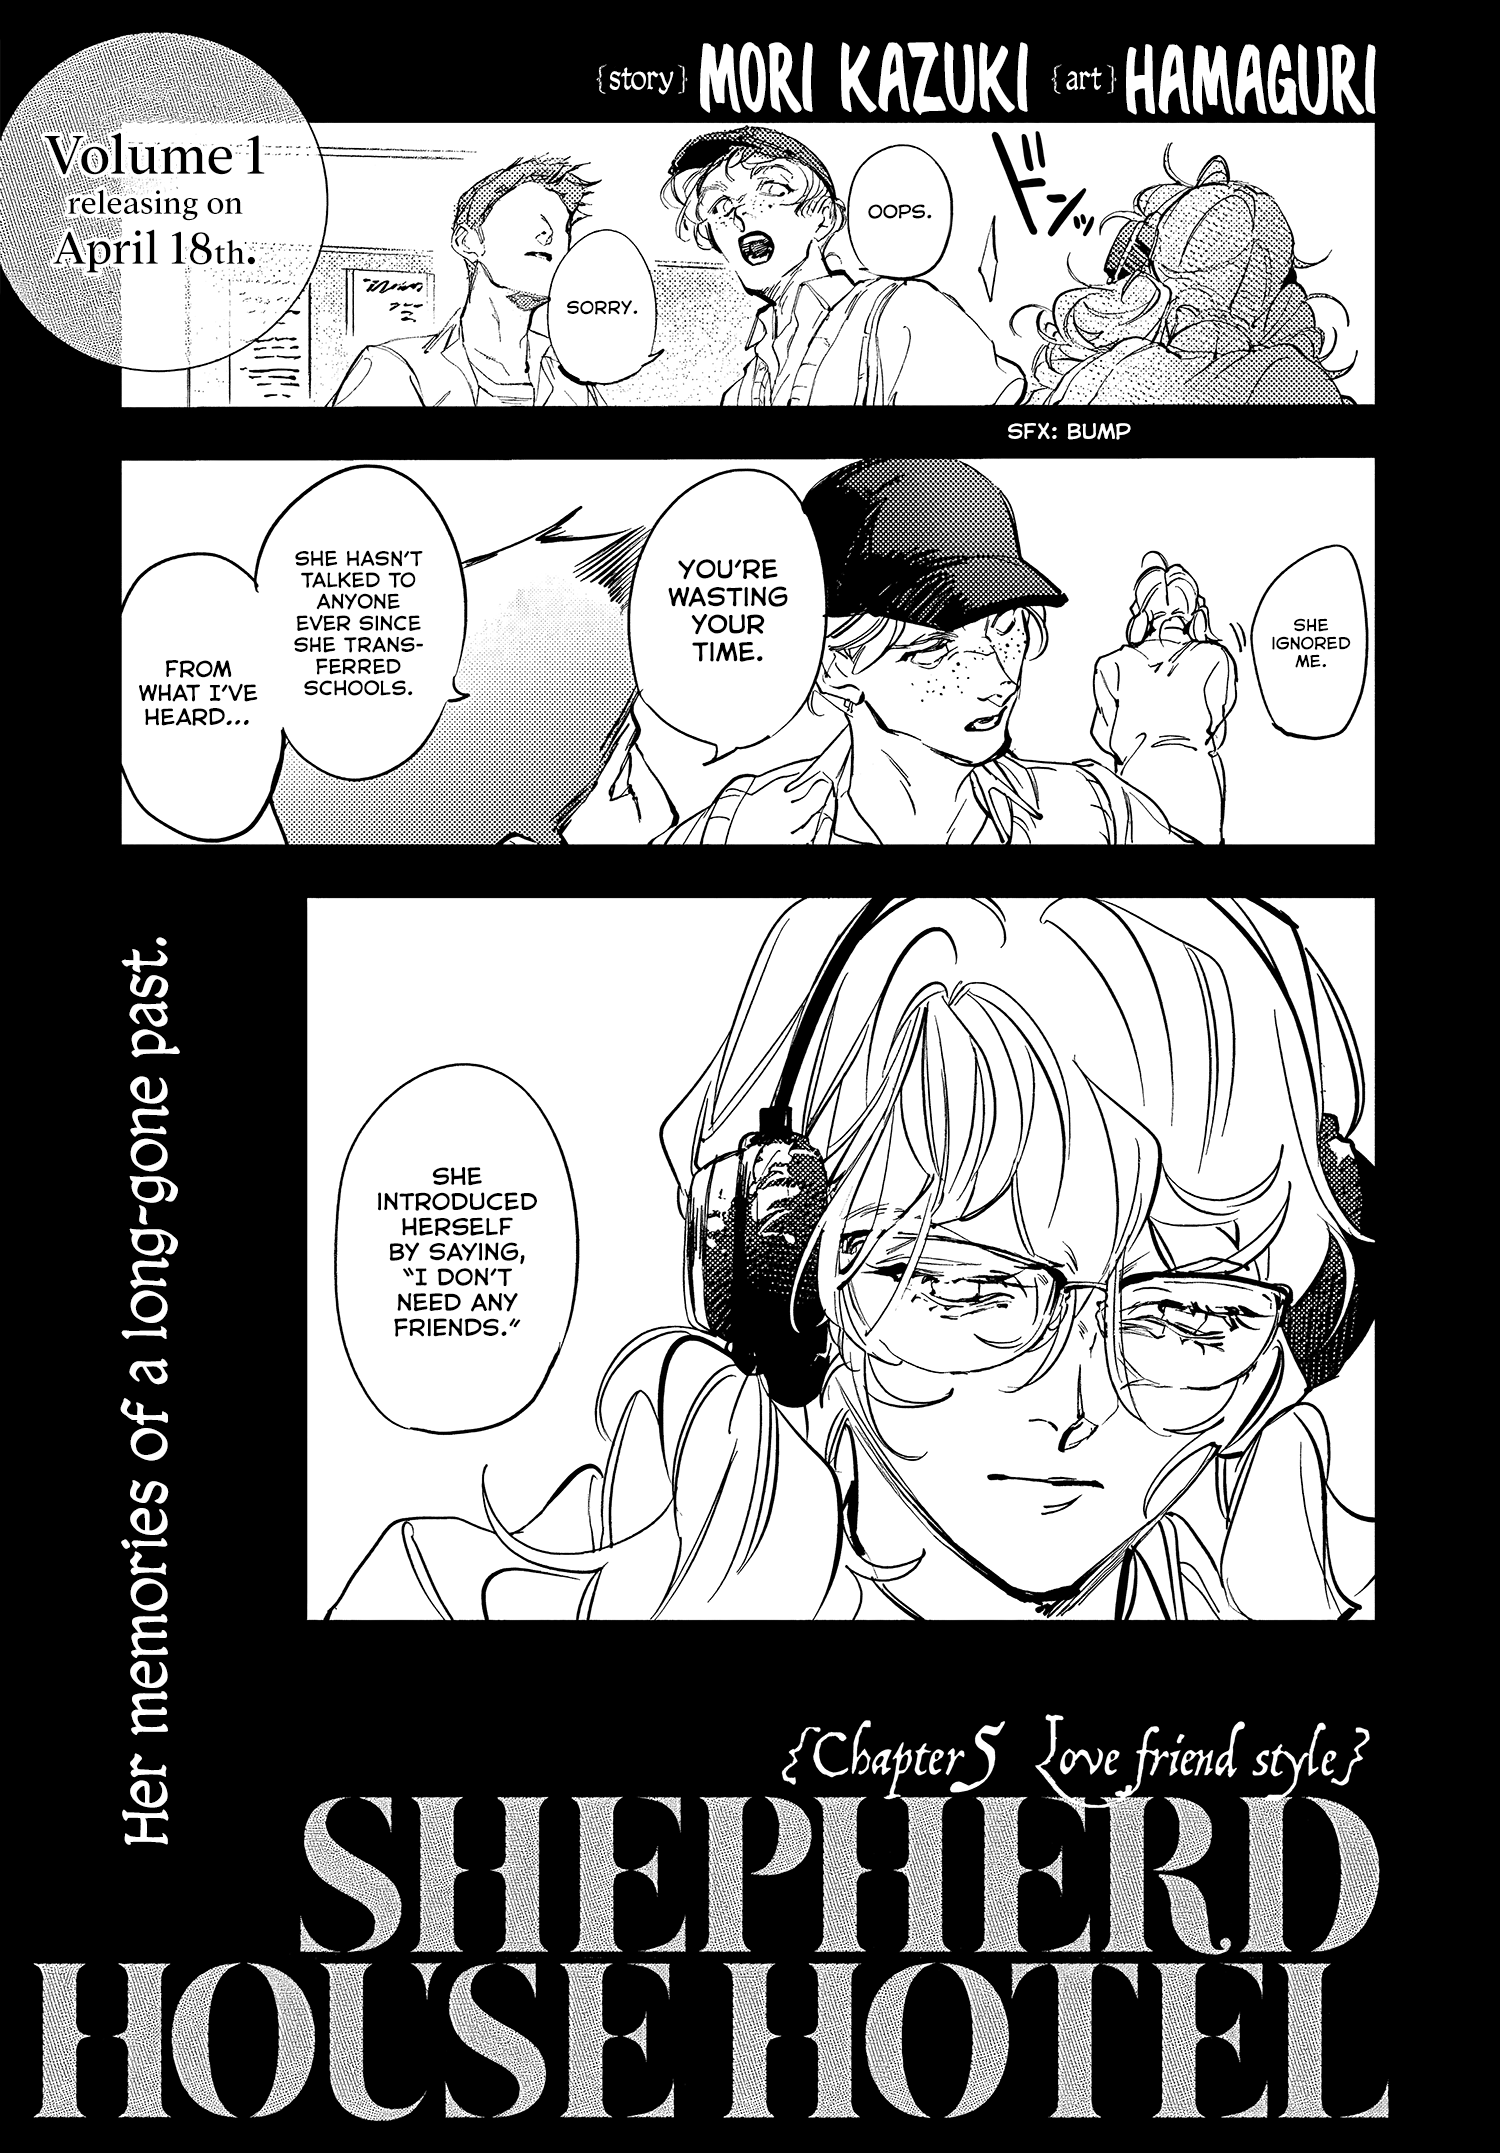 Shepherd House Hotel Vol.2 Chapter 5: Love Friend Style - Picture 2